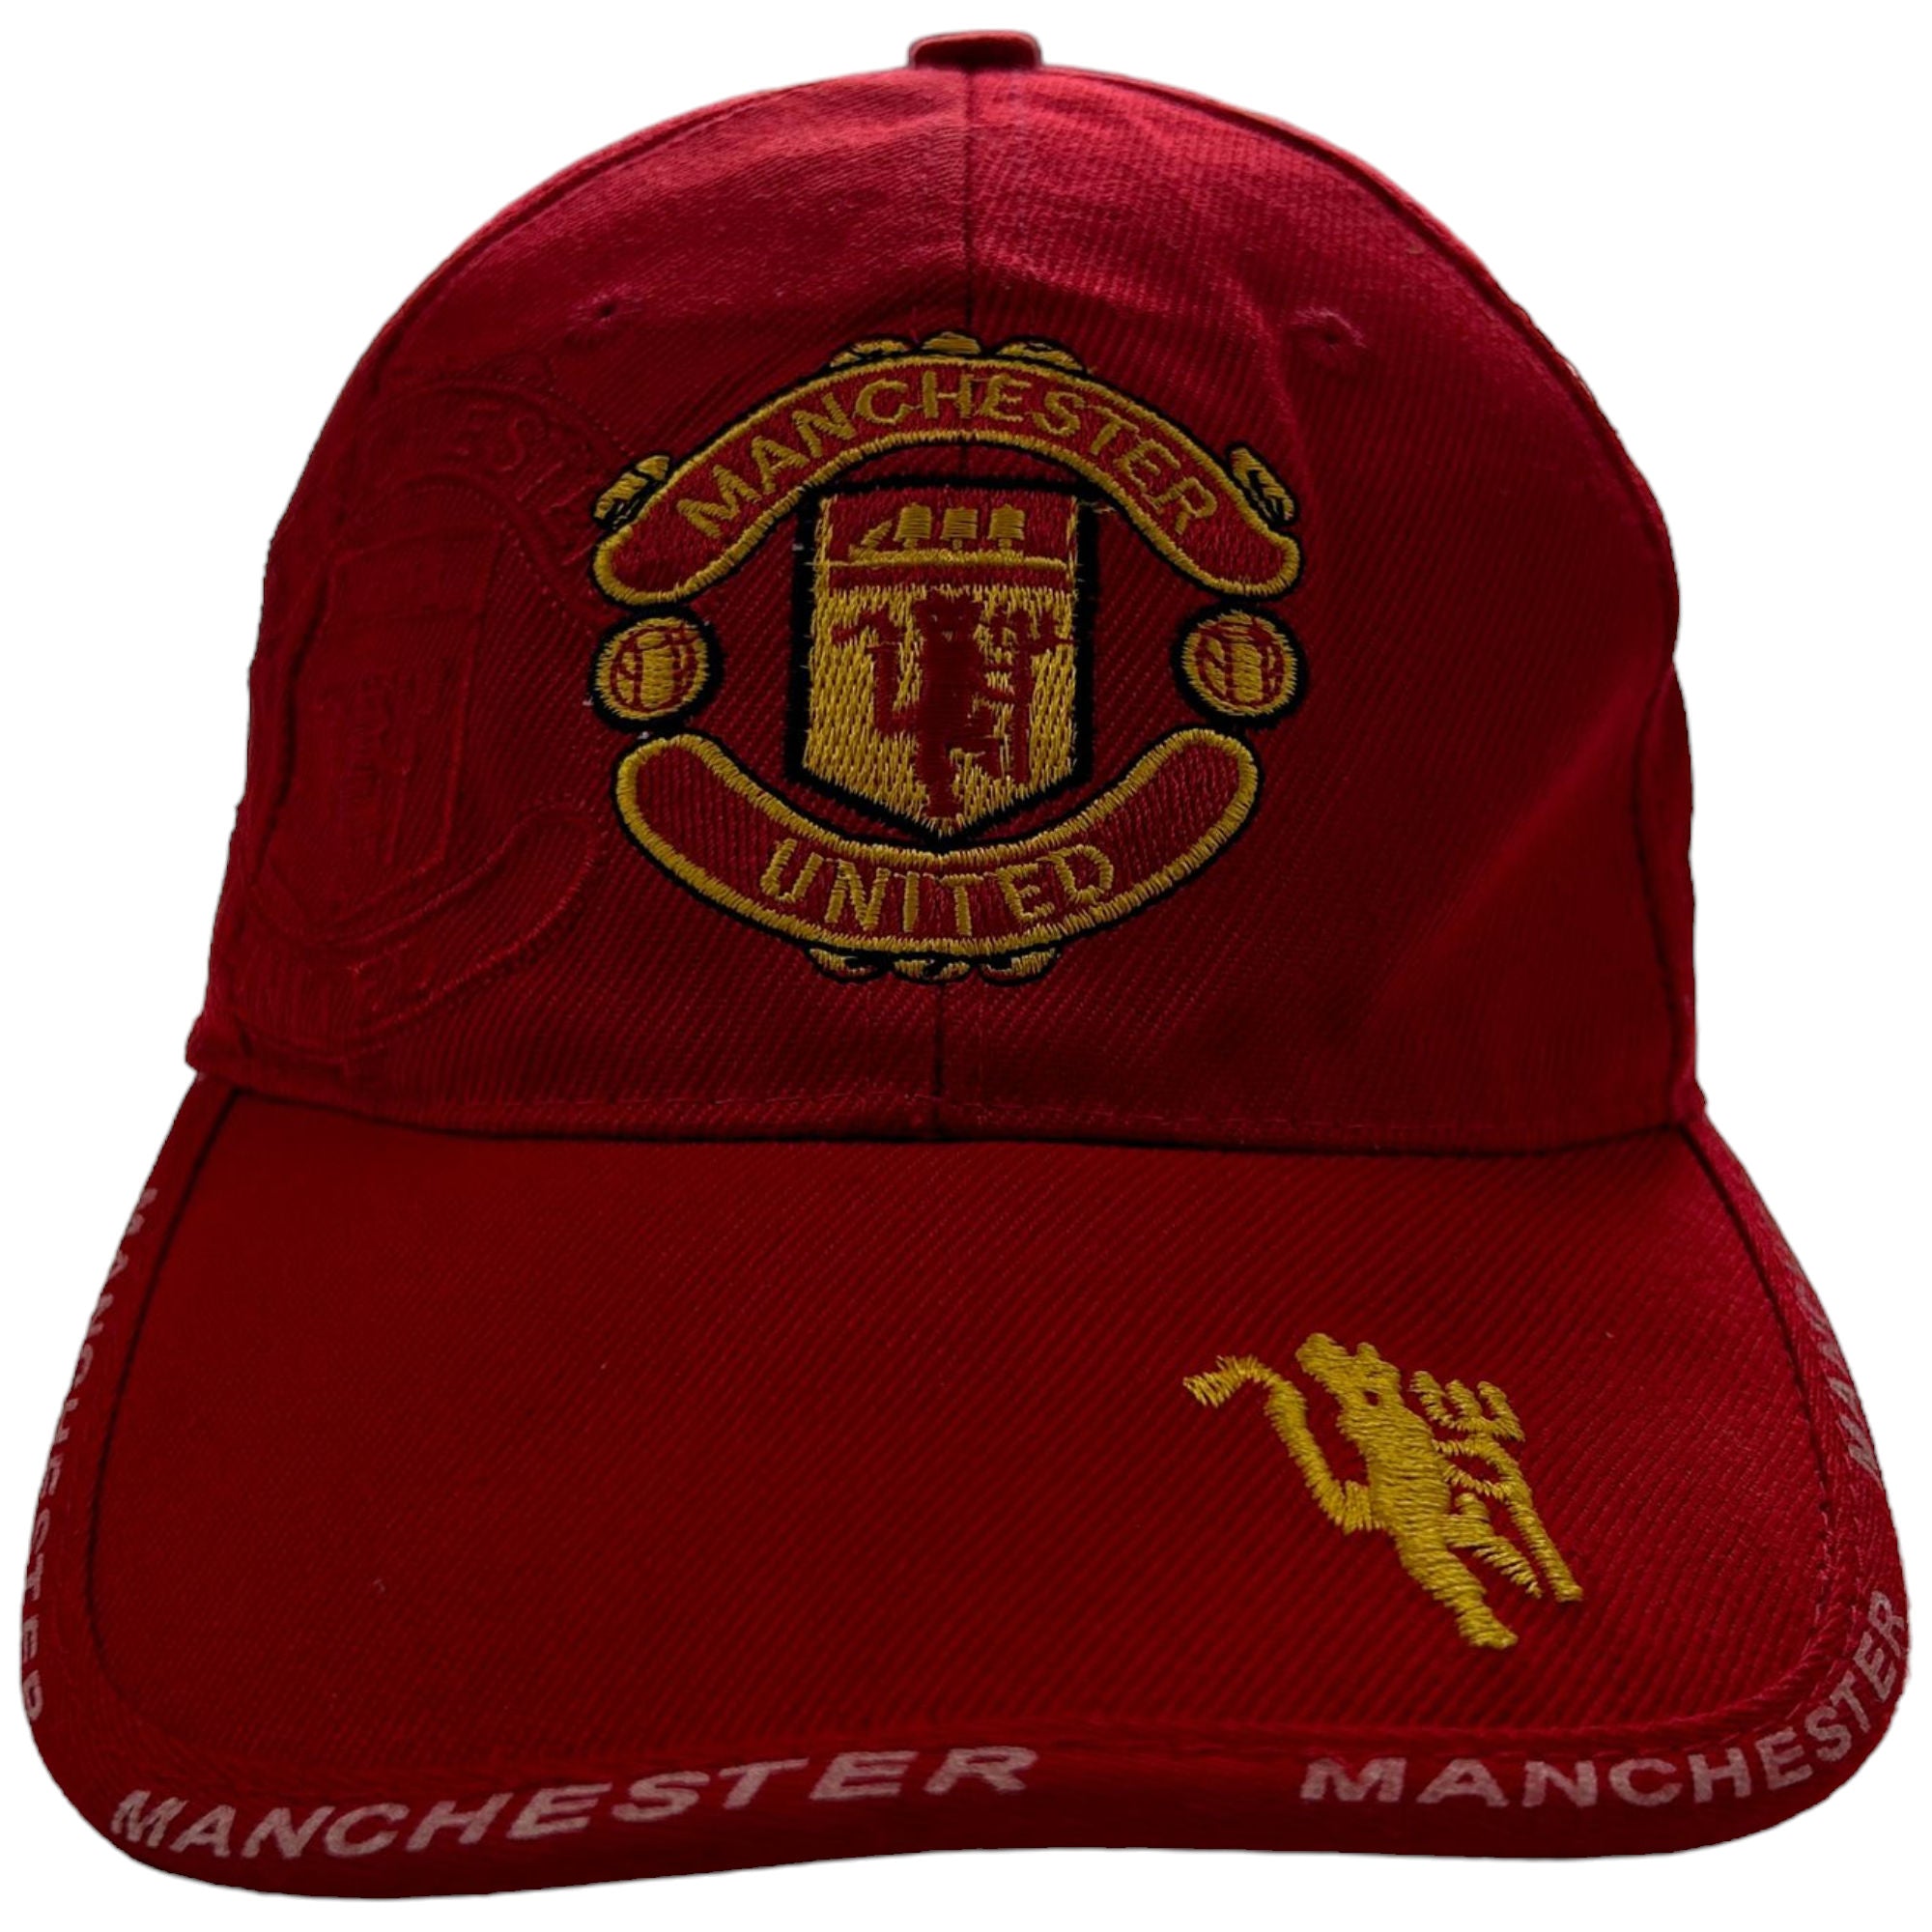 Nike Manchester United Cap Red Embroidered Cotton 00s Streetwear 